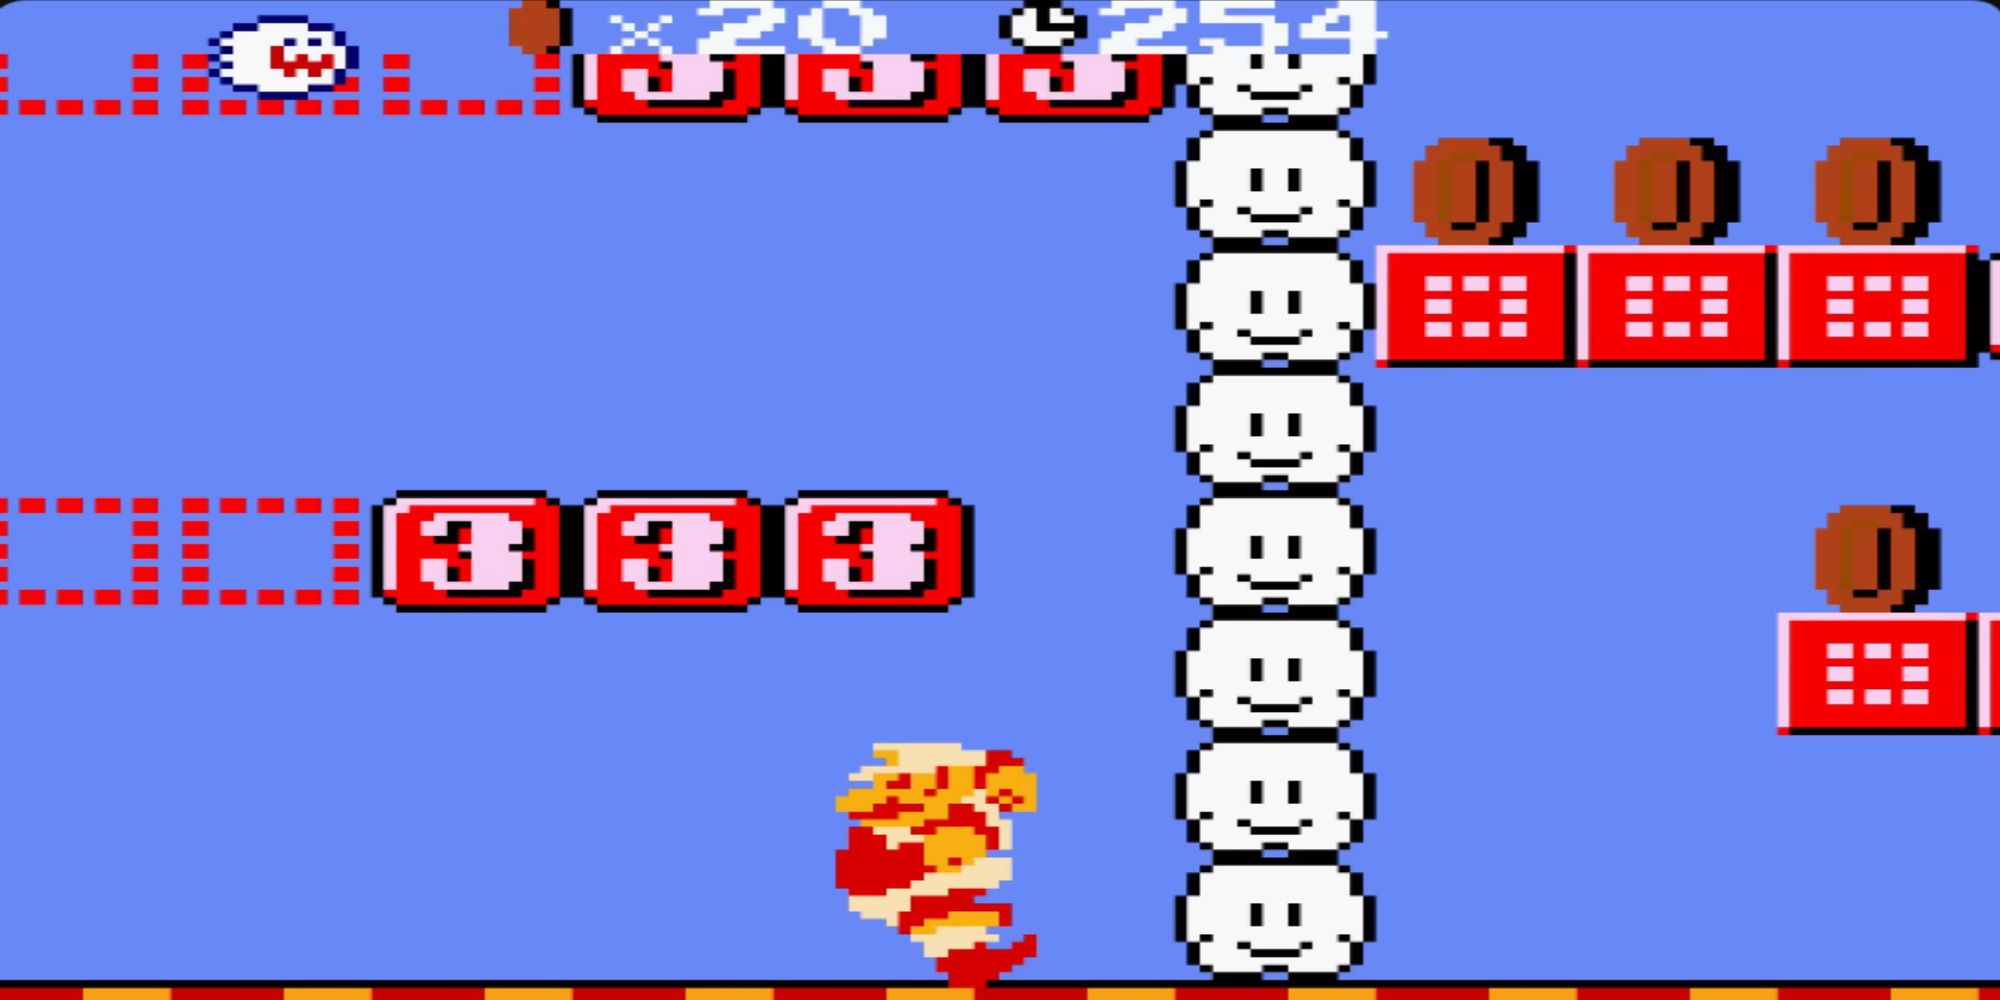 A Fire Flower-powered Mario below '3' boxes and near some clouds, coins and translucent boxes are nearby